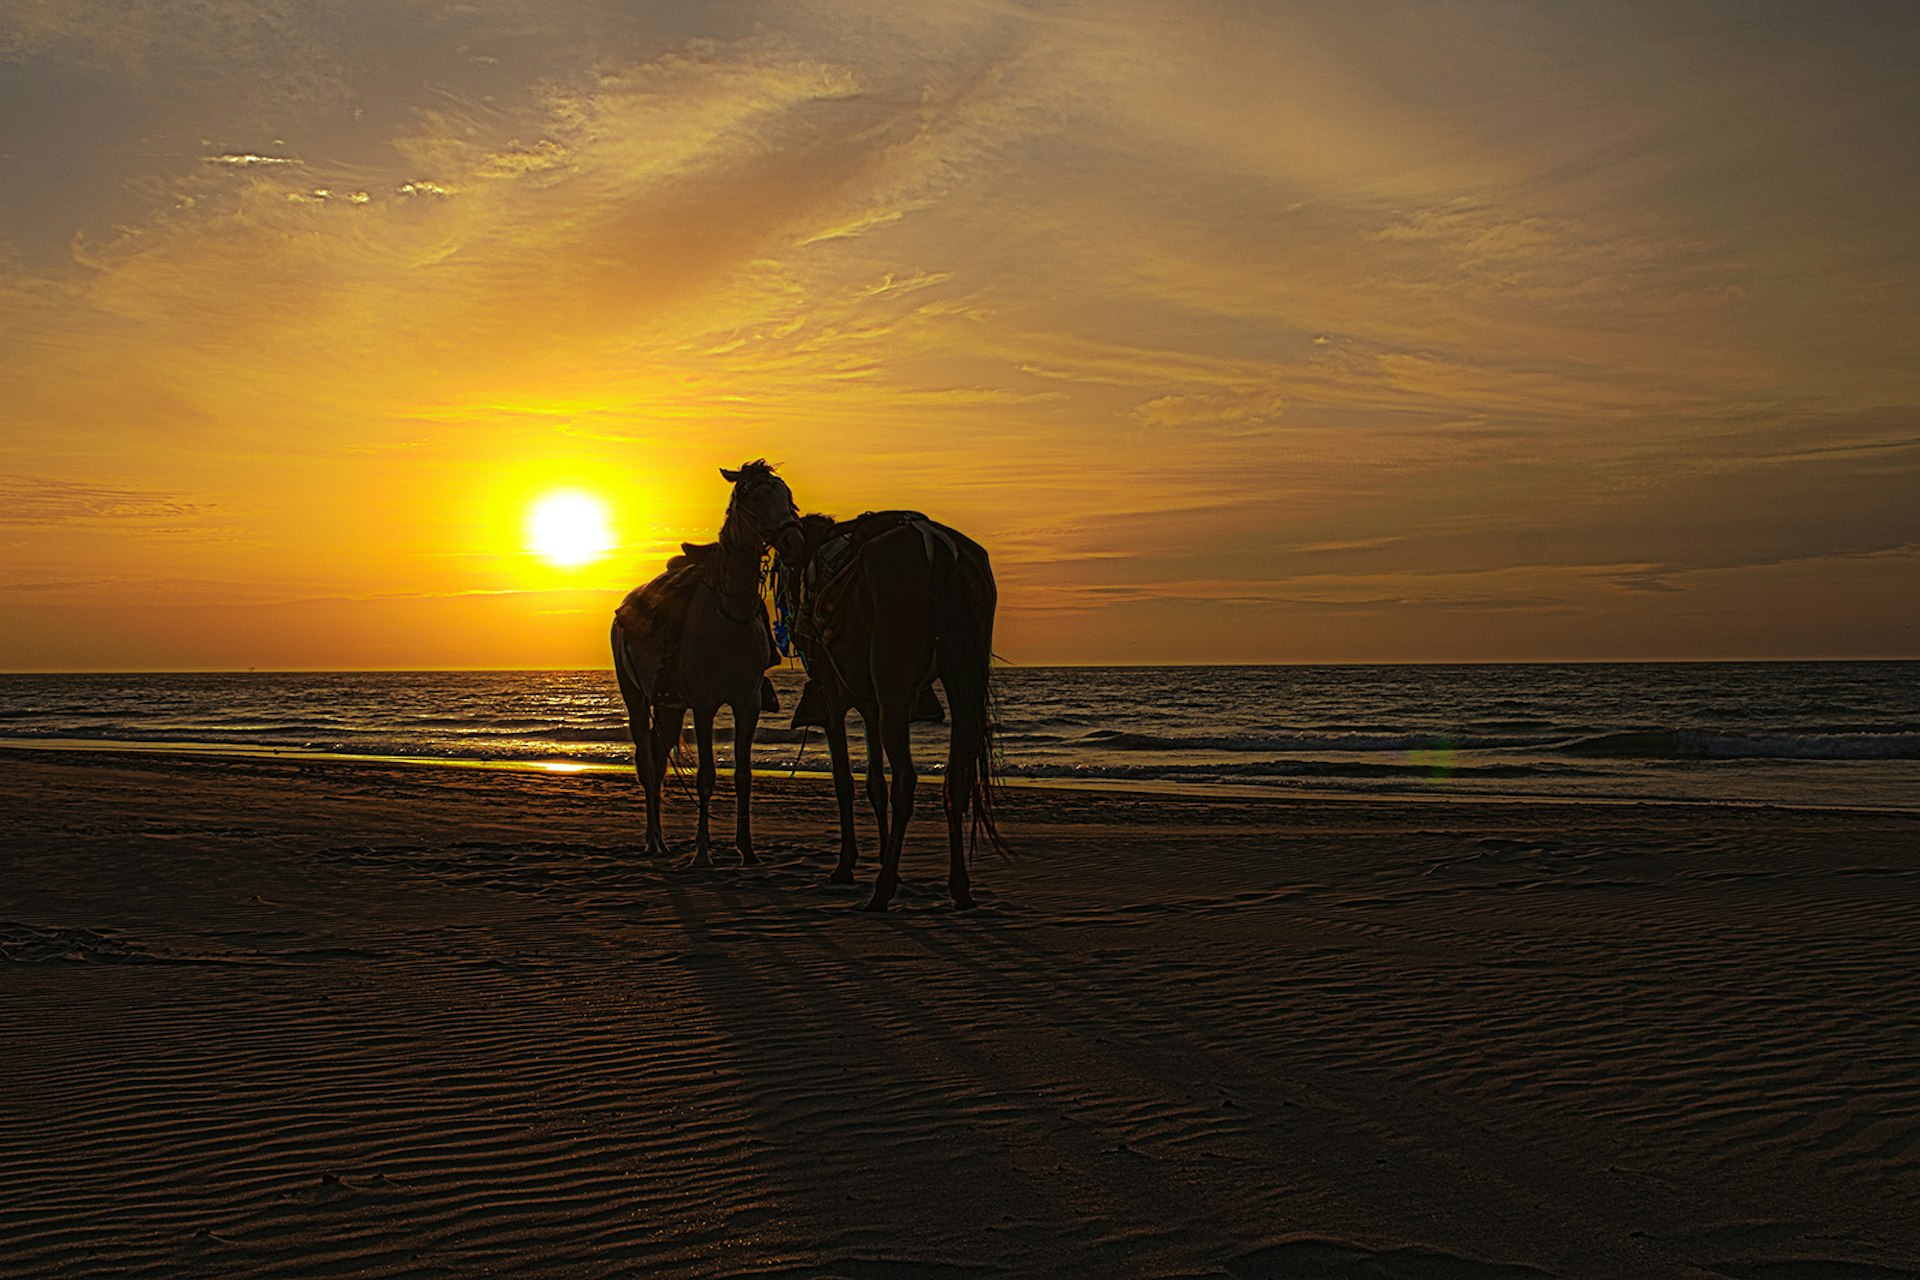 Two horses stand on a beach, backlit by the sunset © Cristhian Fermin / shutterstock